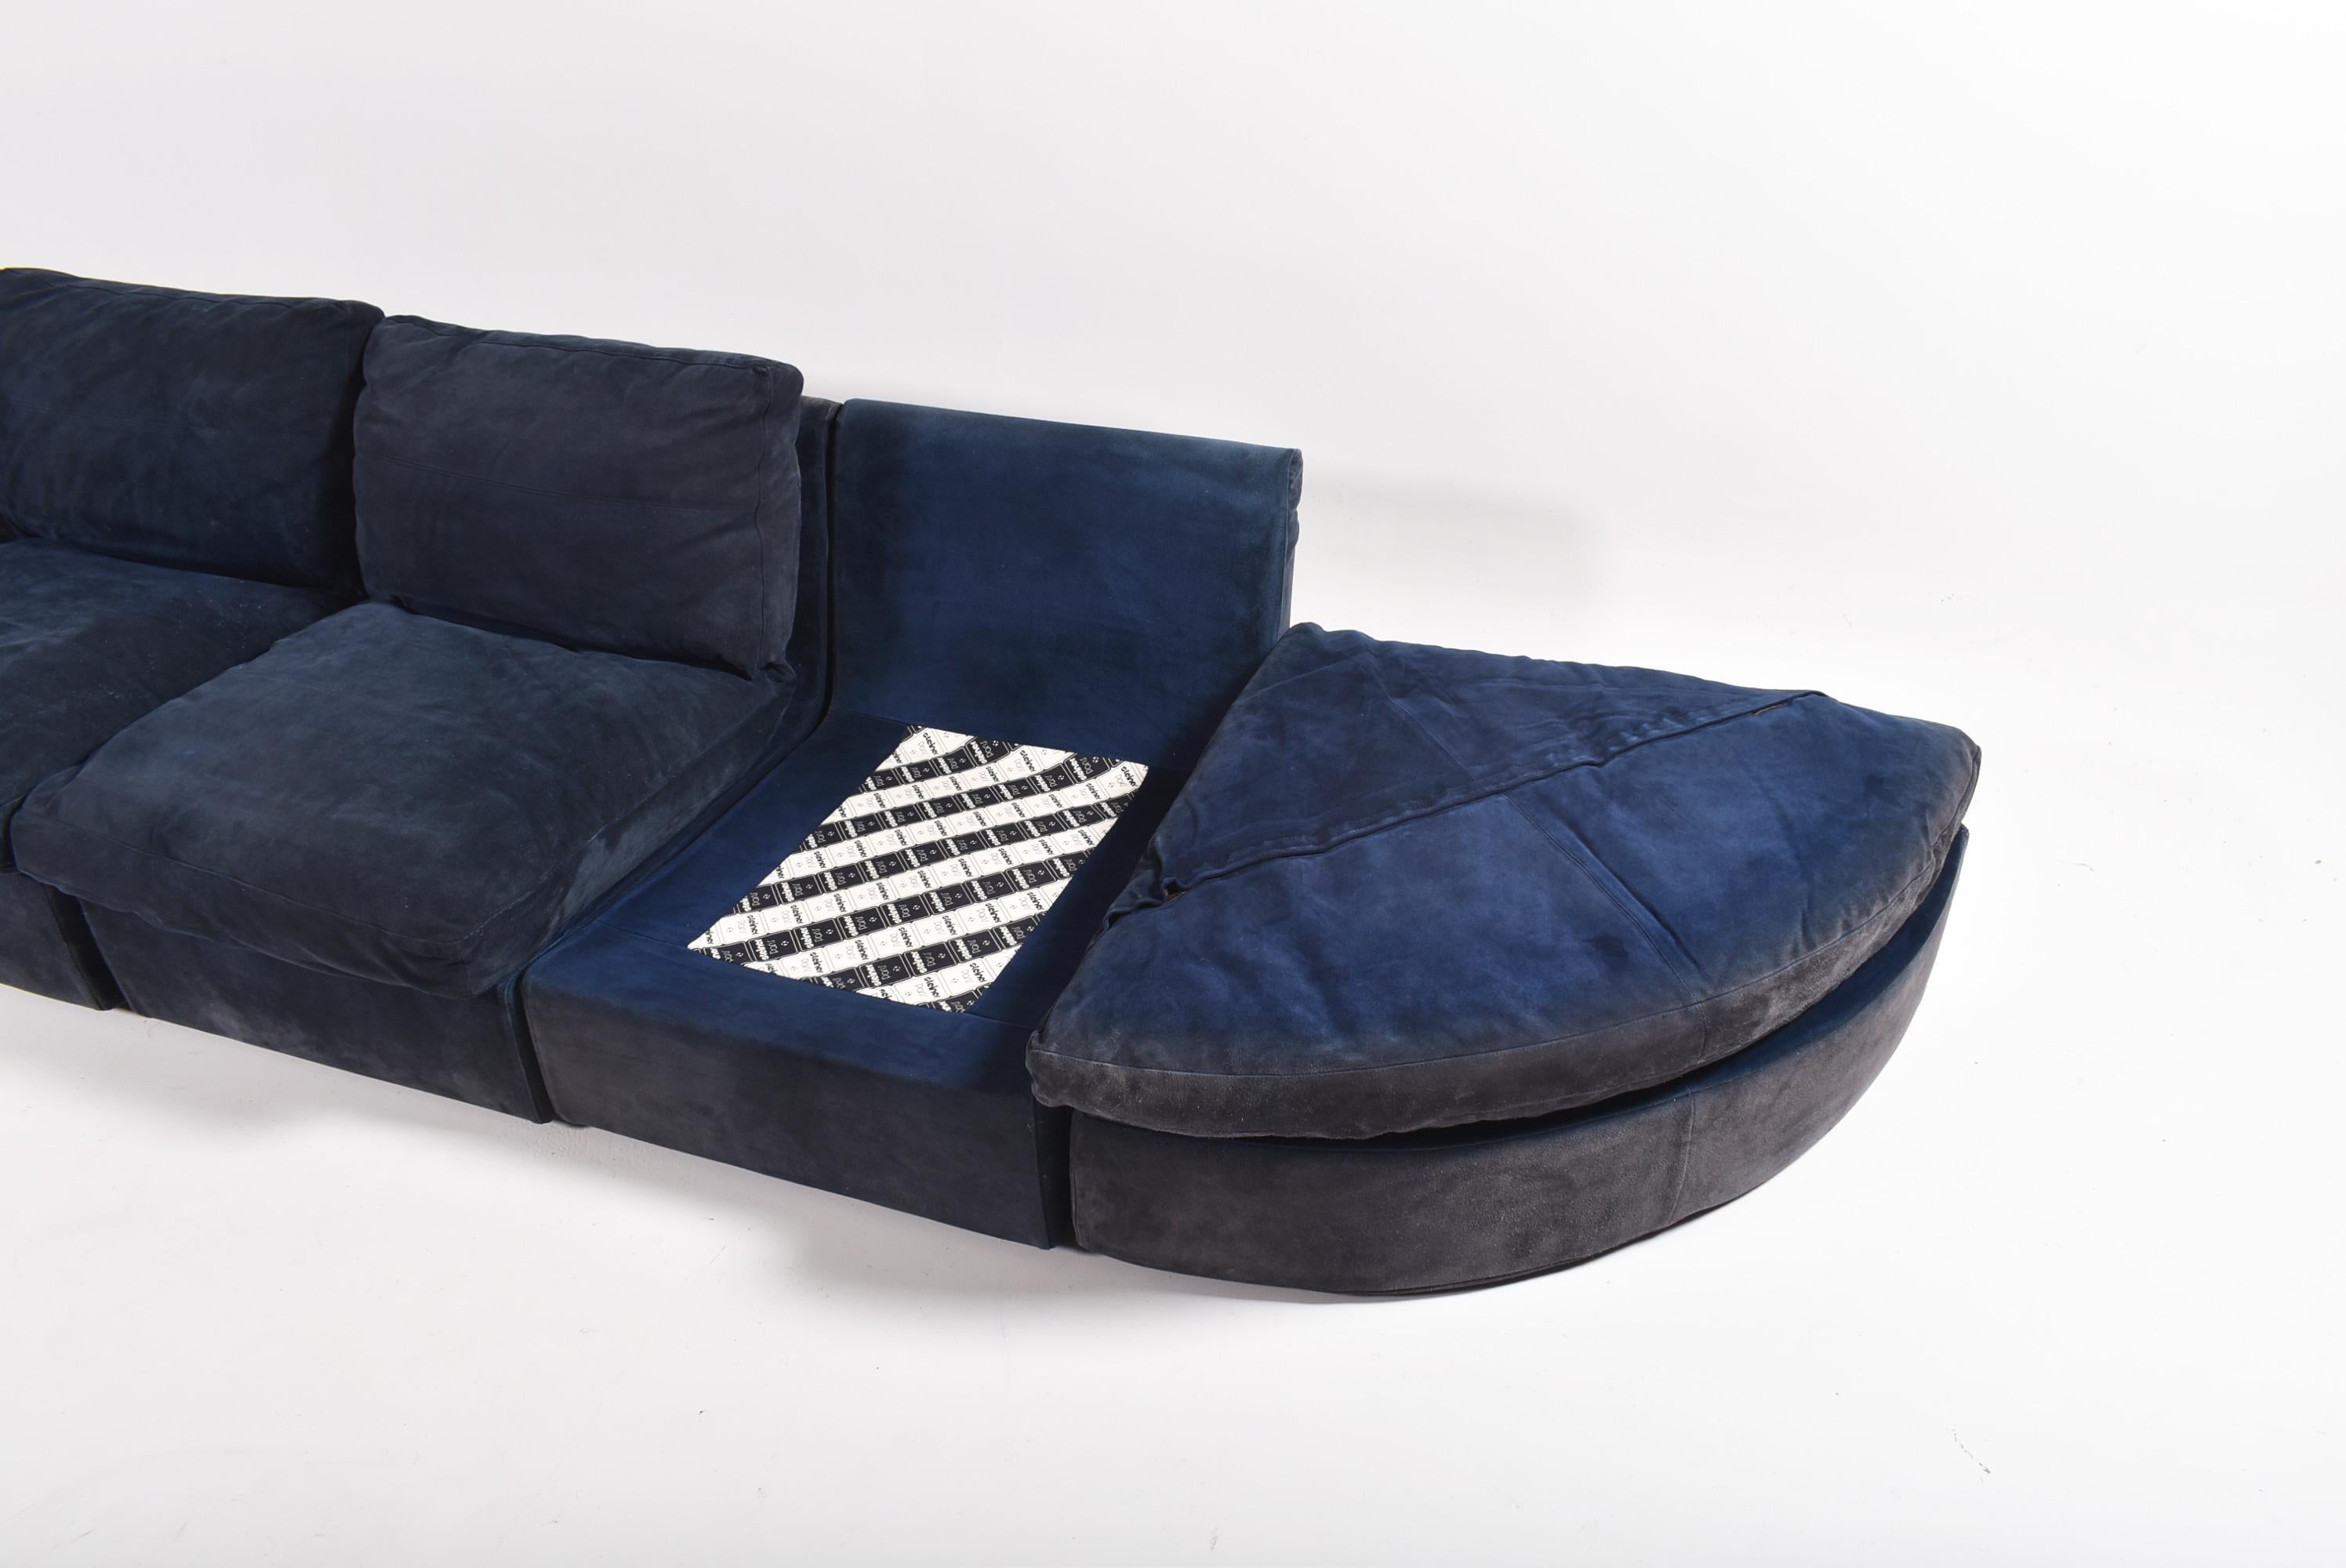 Late 20th Century Mid-Century Modern Sectional Blue Suede Sofa by Steiner, Paris, 1980